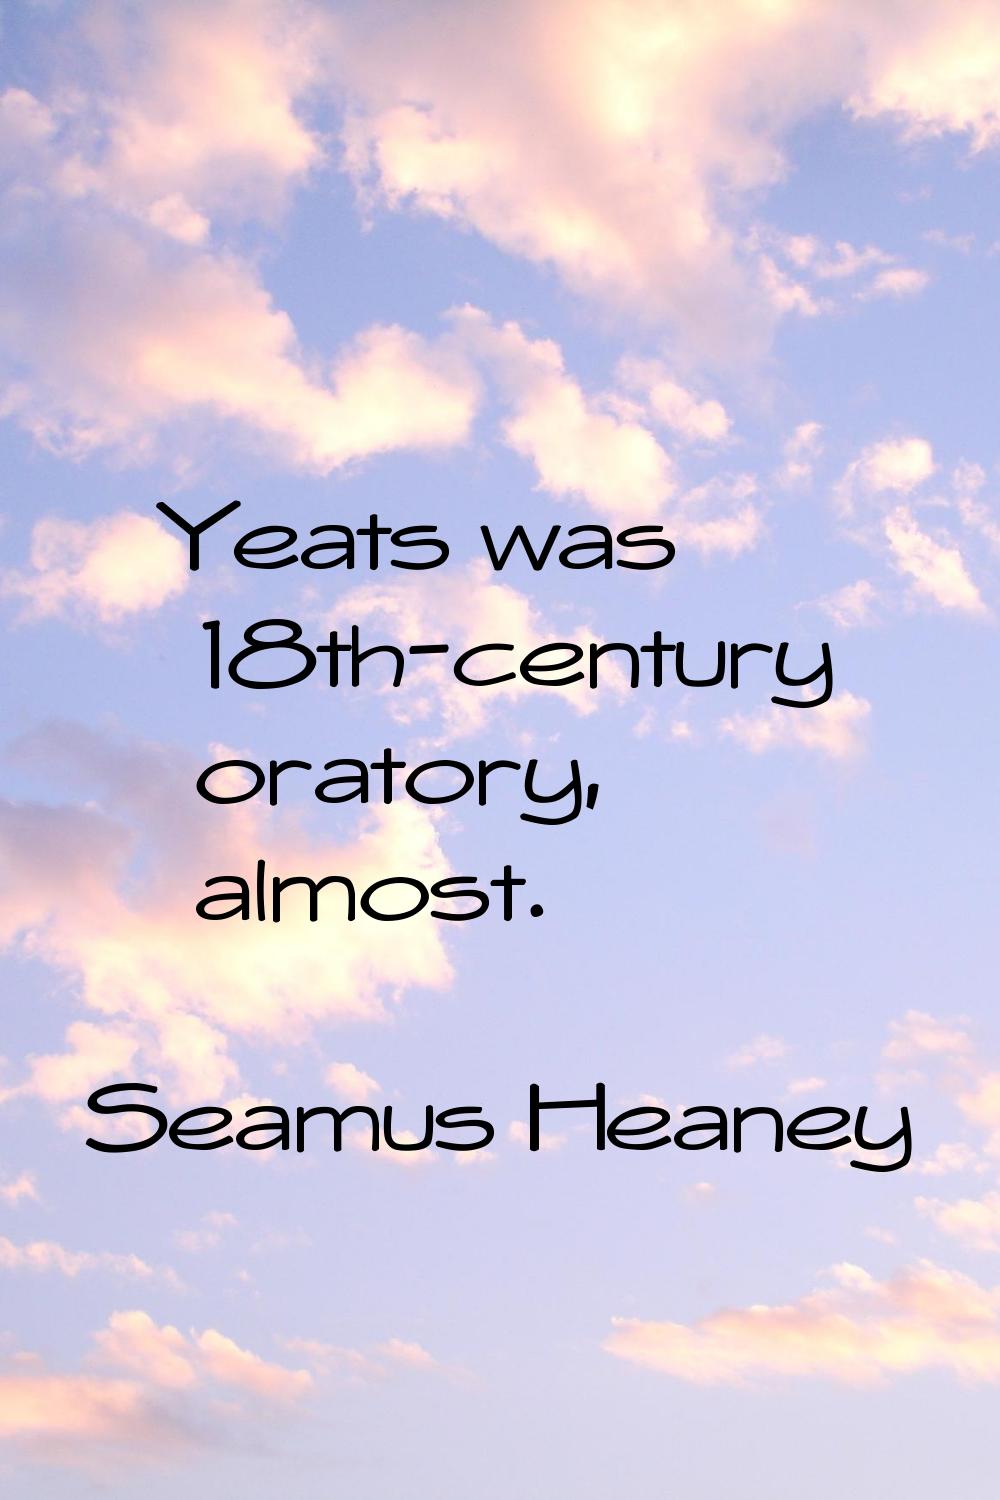 Yeats was 18th-century oratory, almost.